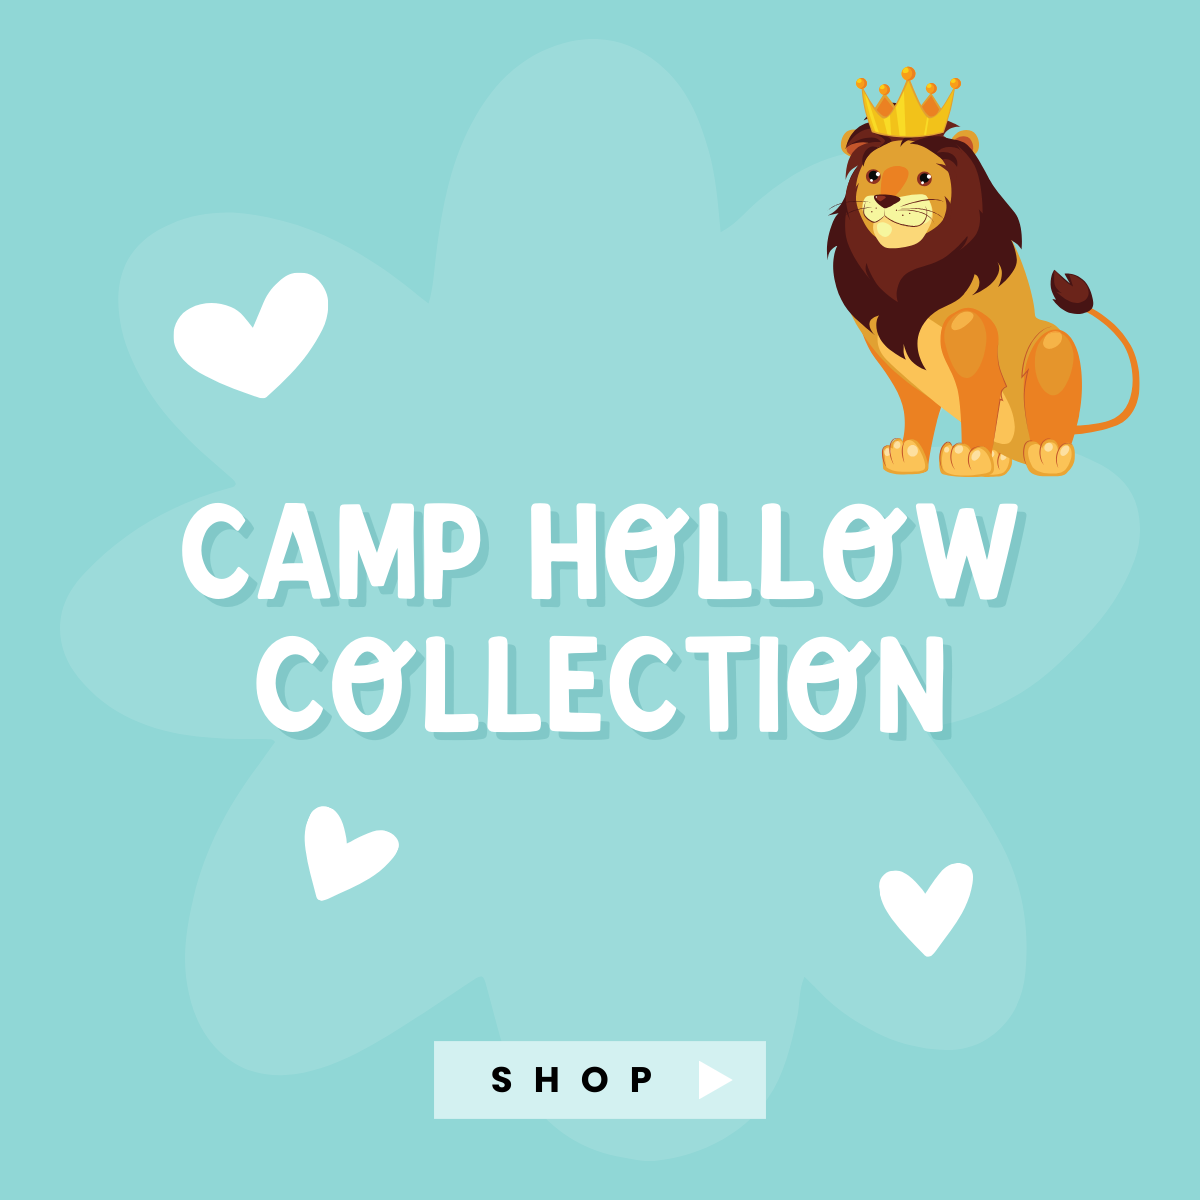 Camp Hollow Collection